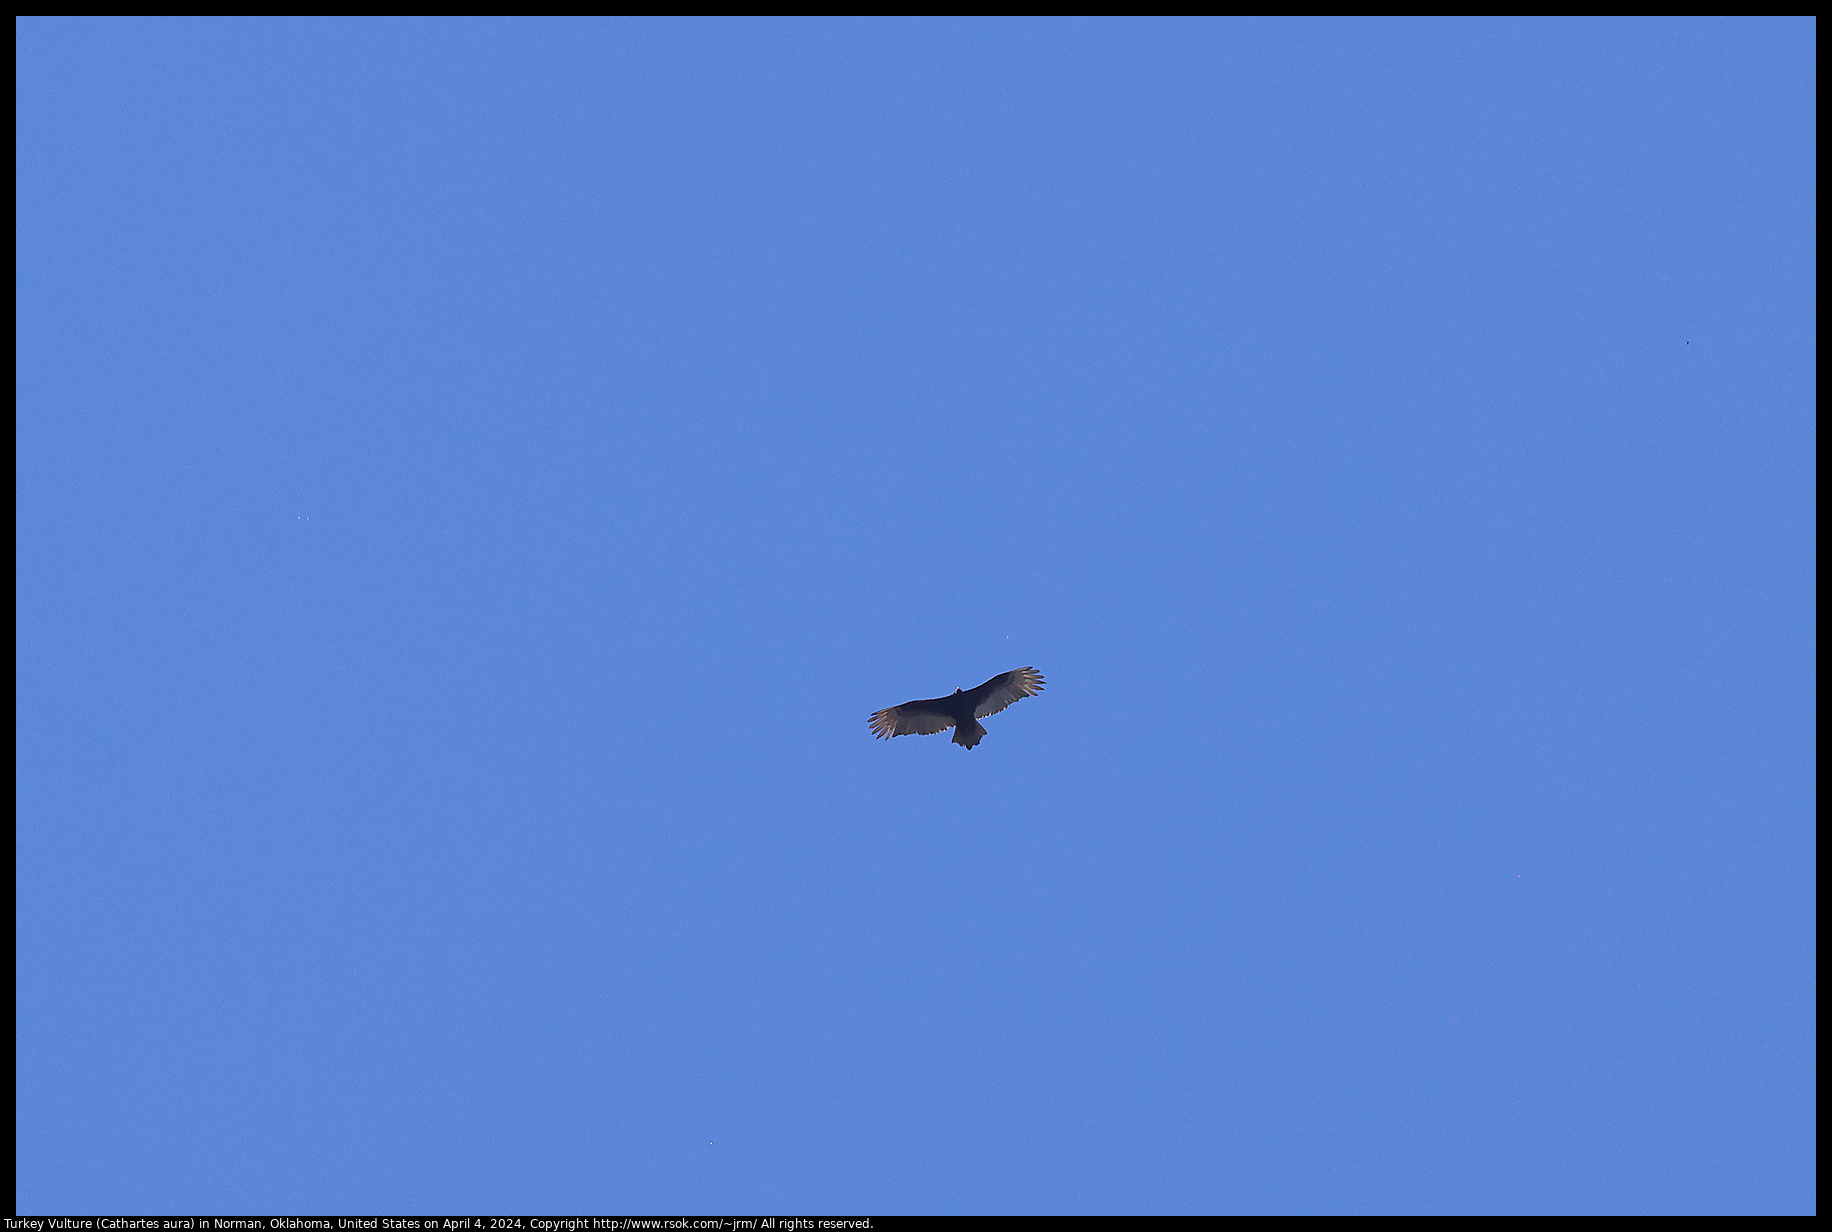 Turkey Vulture (Cathartes aura) in Norman, Oklahoma, United States on April 4, 2024